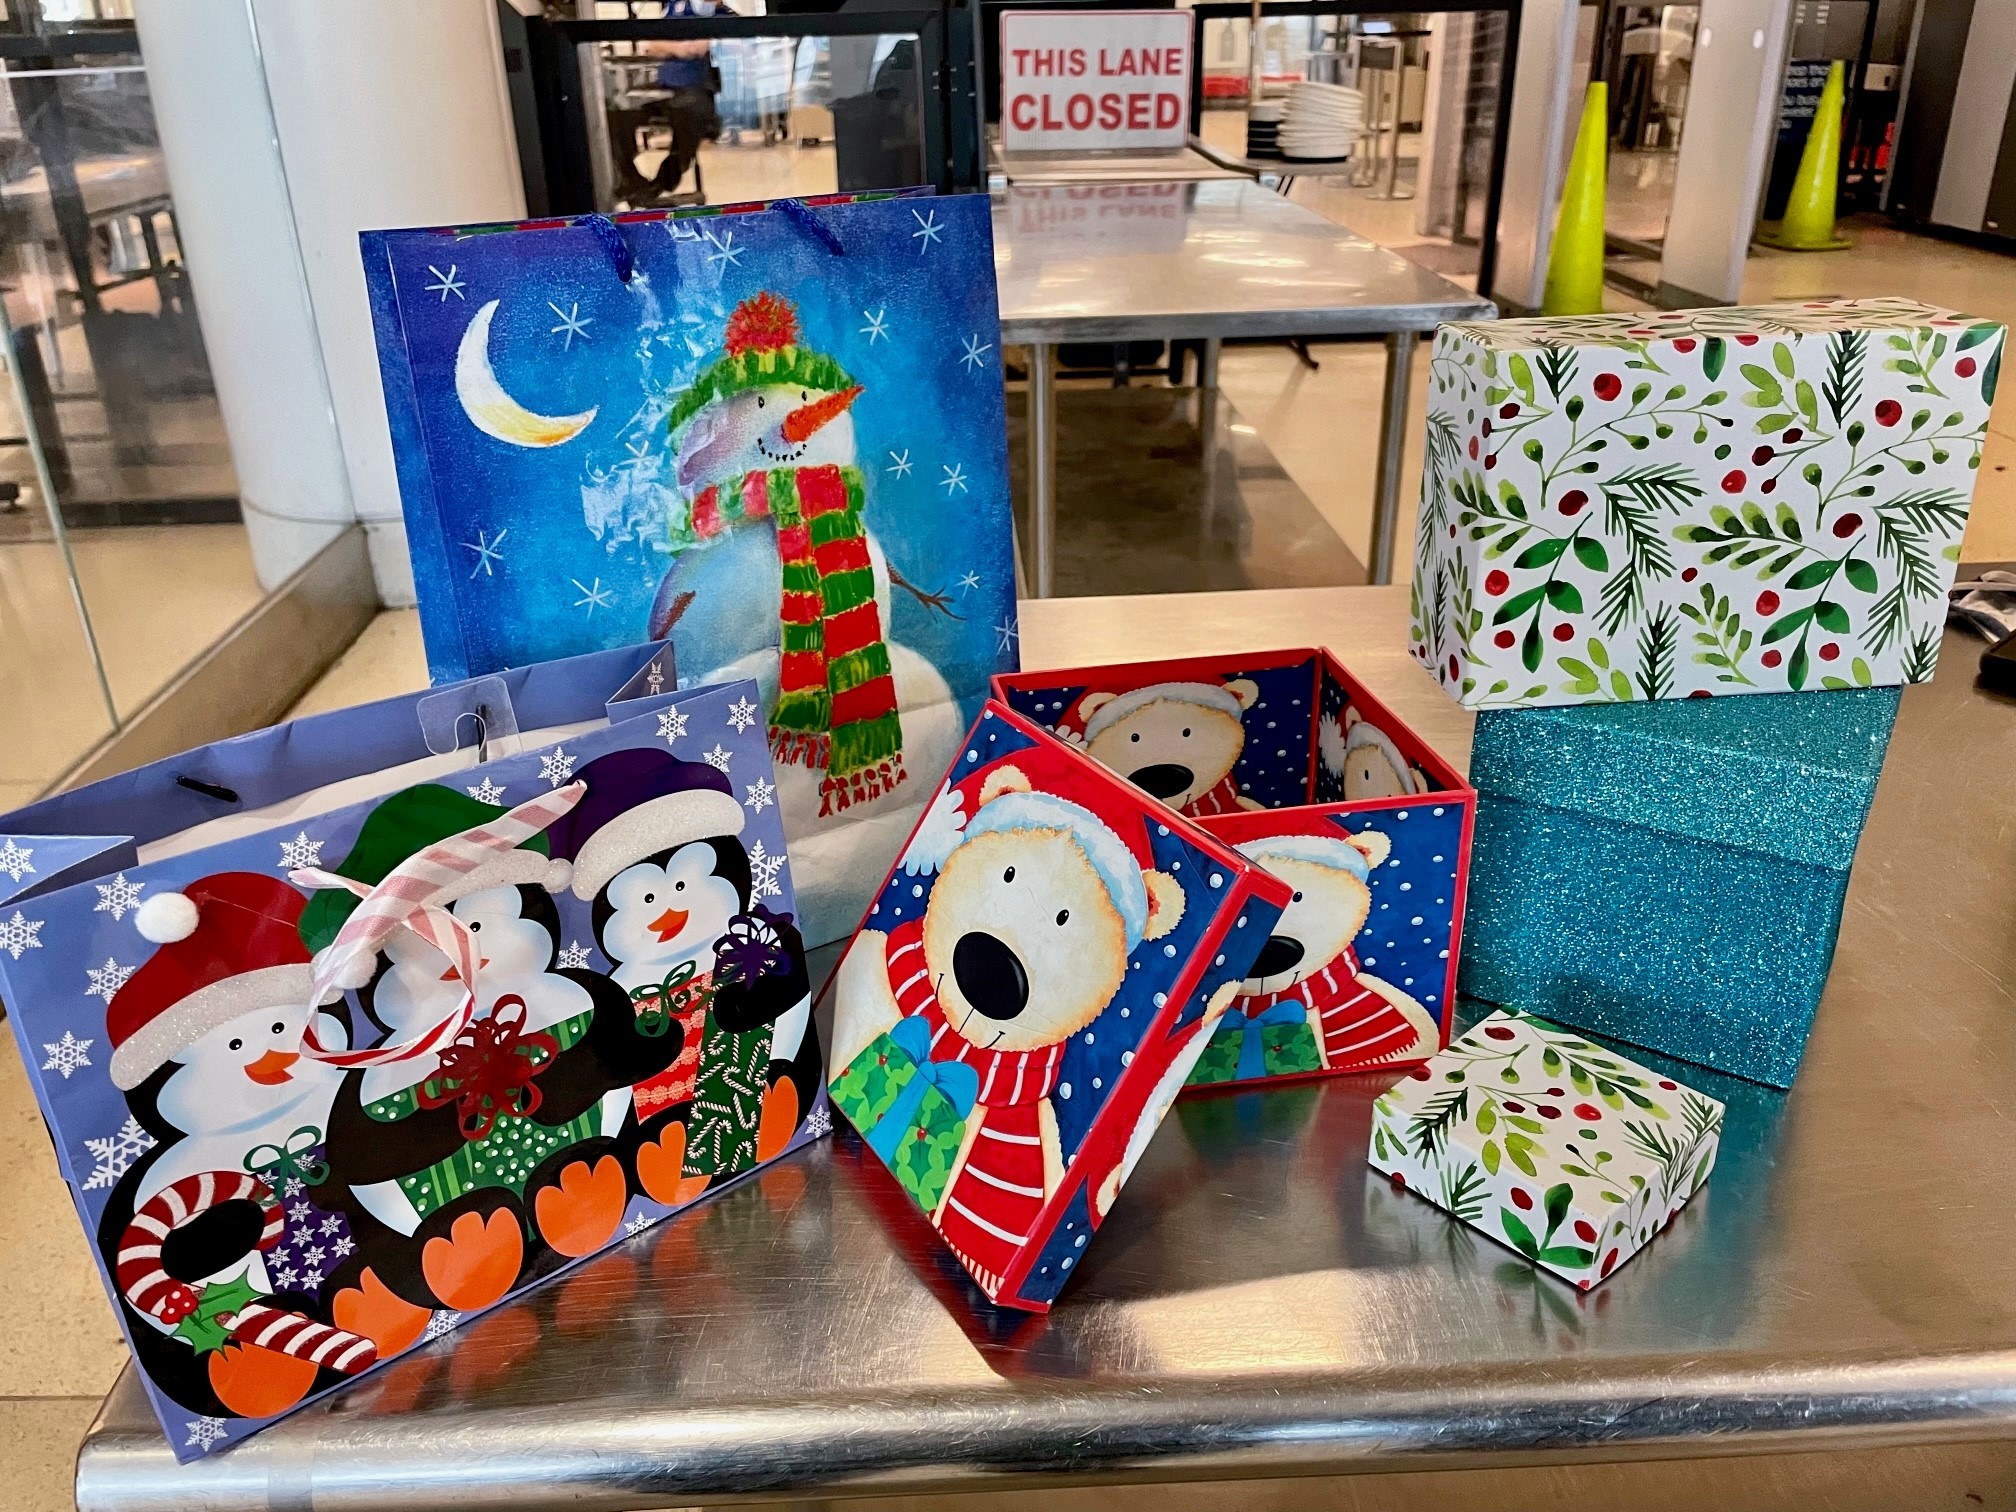 Use of gift boxes and gift bags are recommended for traveling with gifts. (TSA photo)